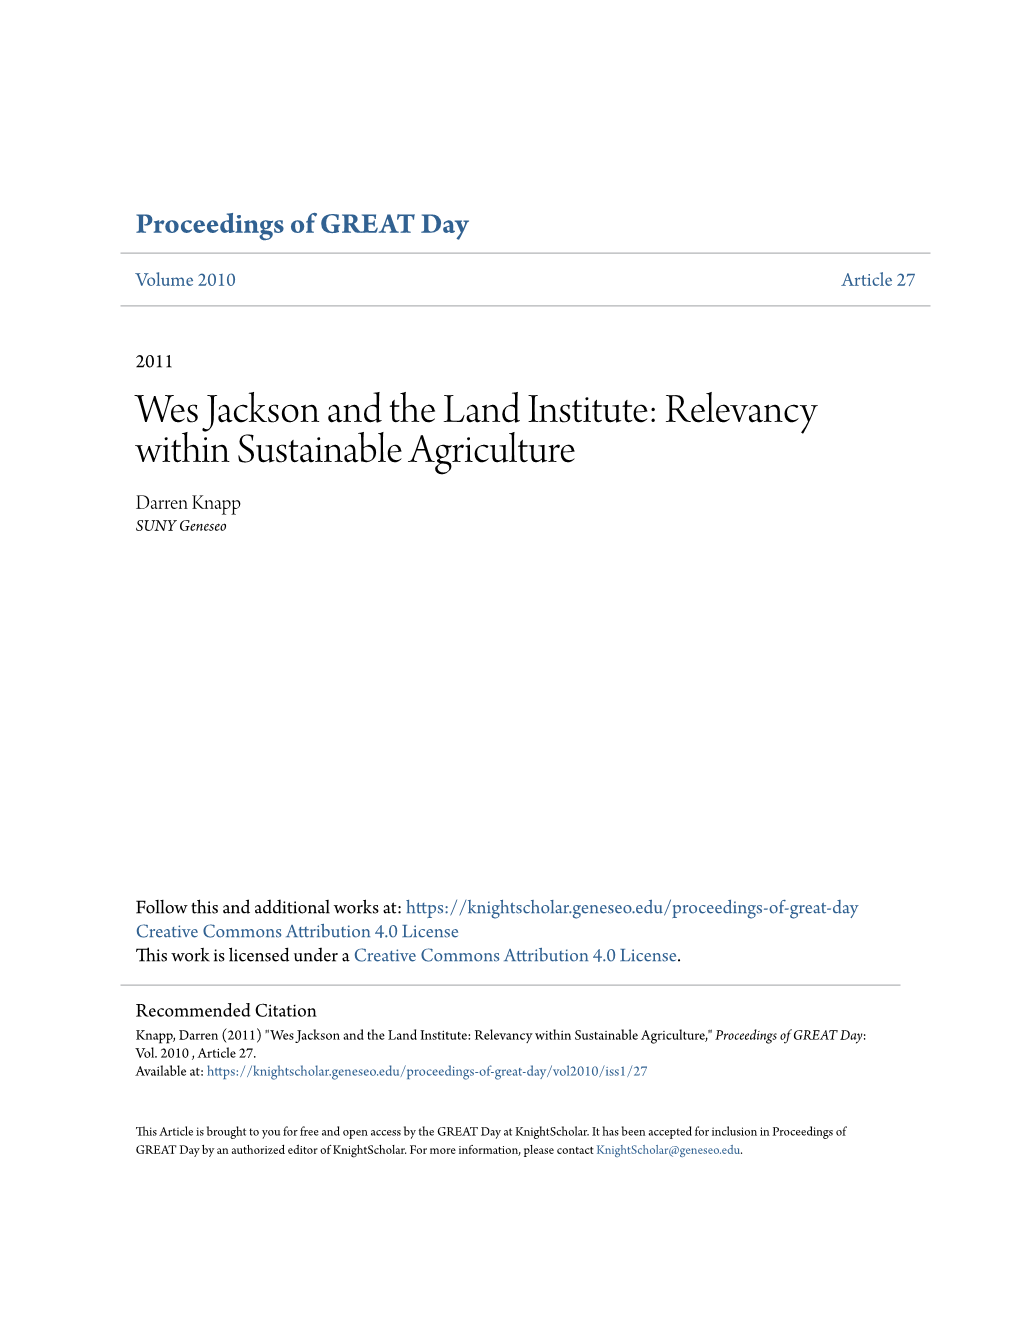 Wes Jackson and the Land Institute: Relevancy Within Sustainable Agriculture Darren Knapp SUNY Geneseo